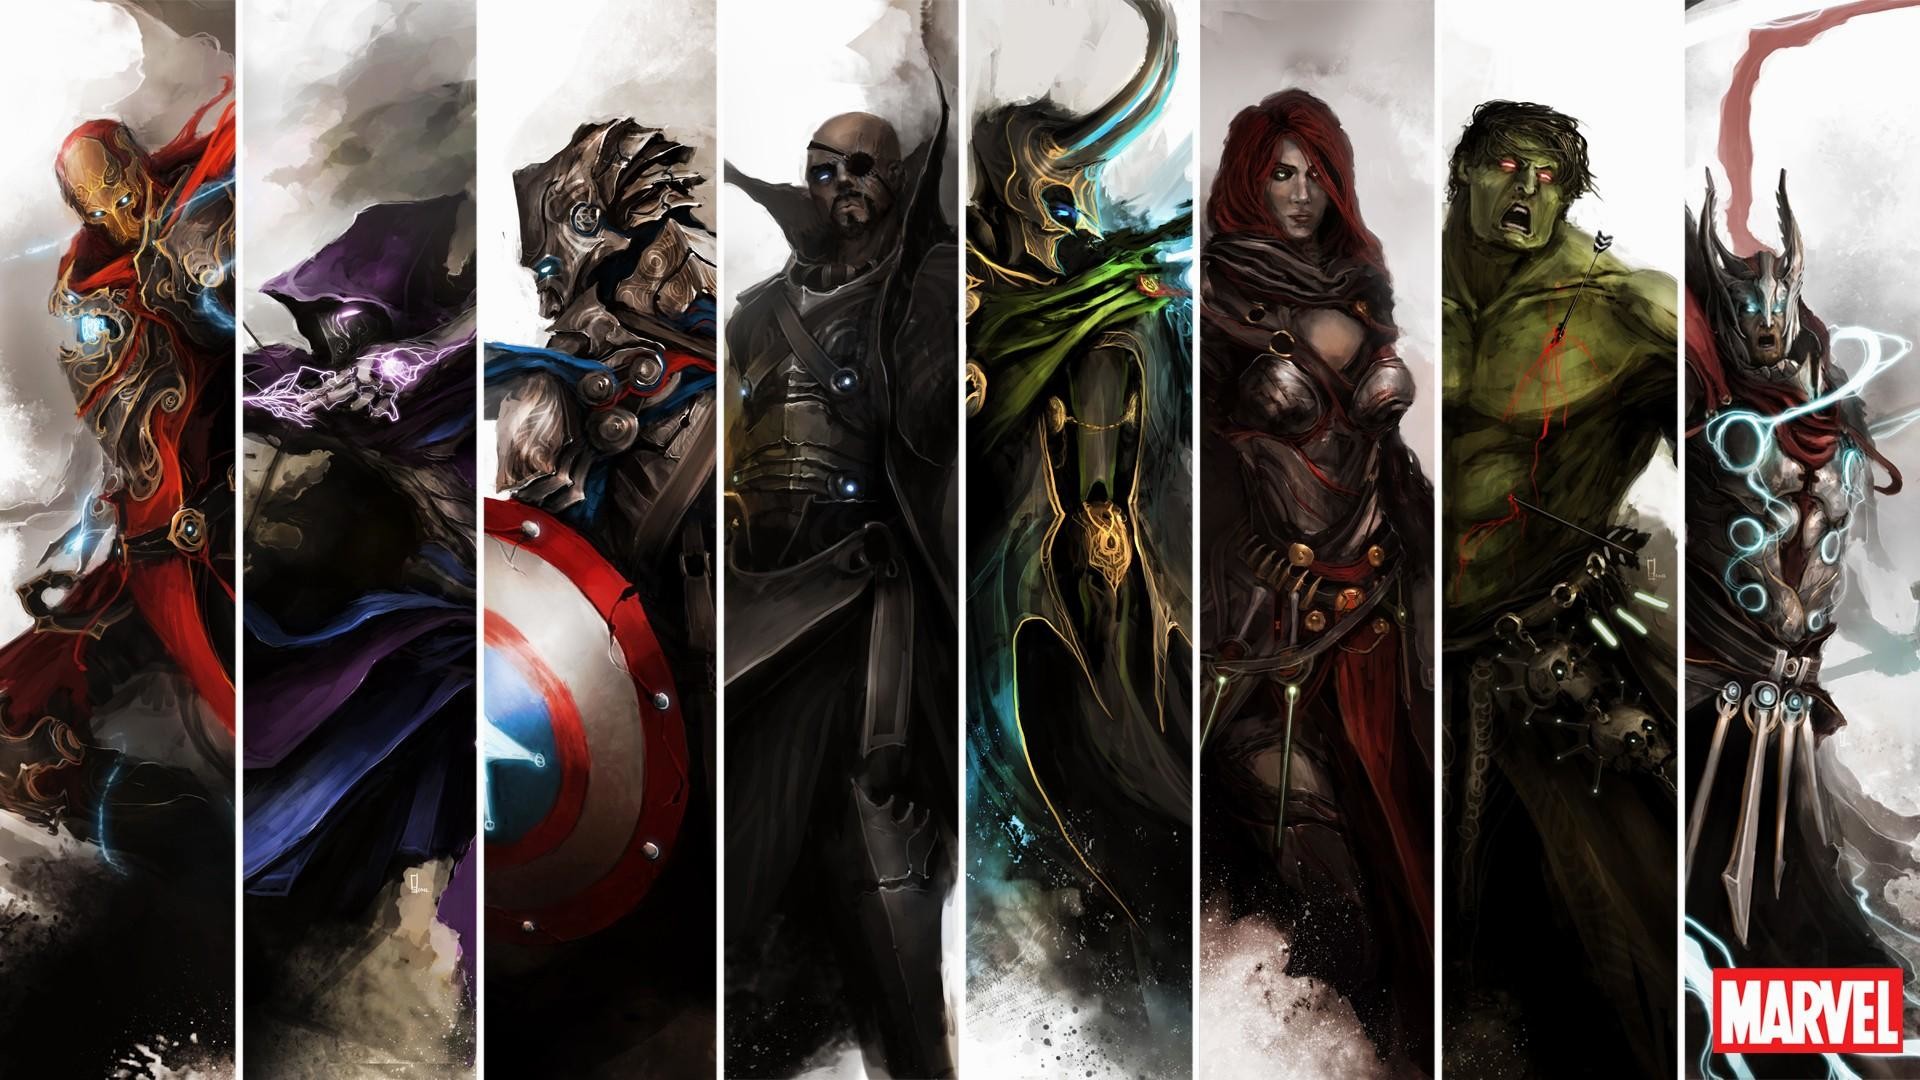 1920x1080 8. marvel-wallpapers8-600x338